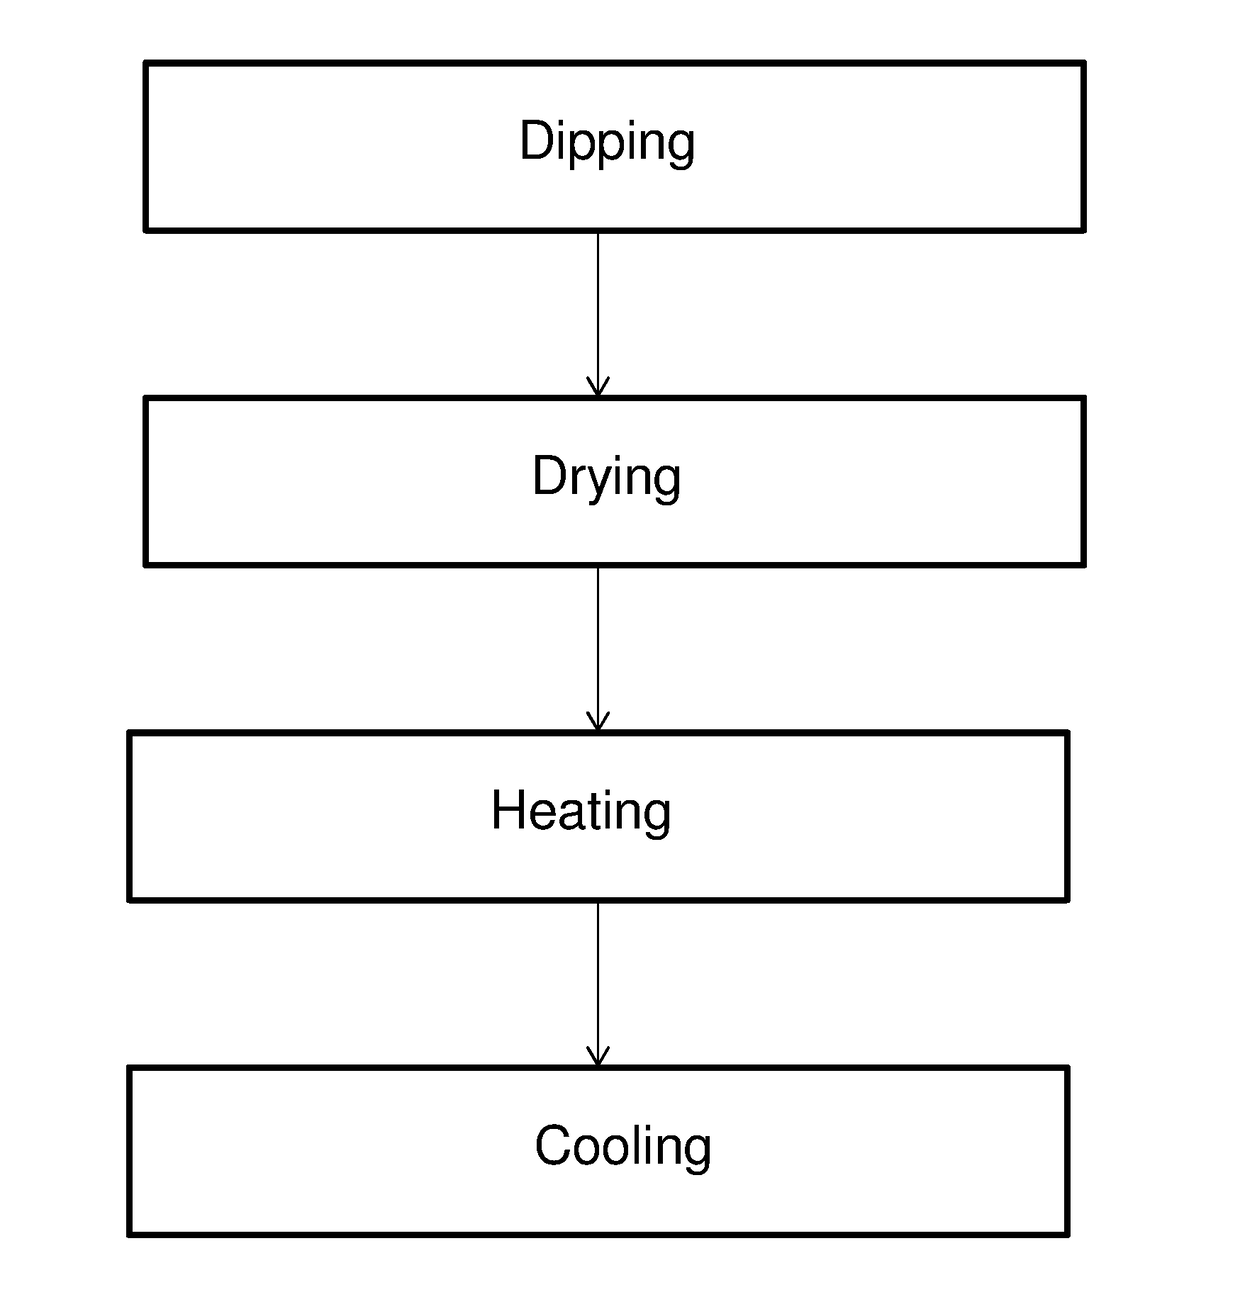 Surface treatment process for objects